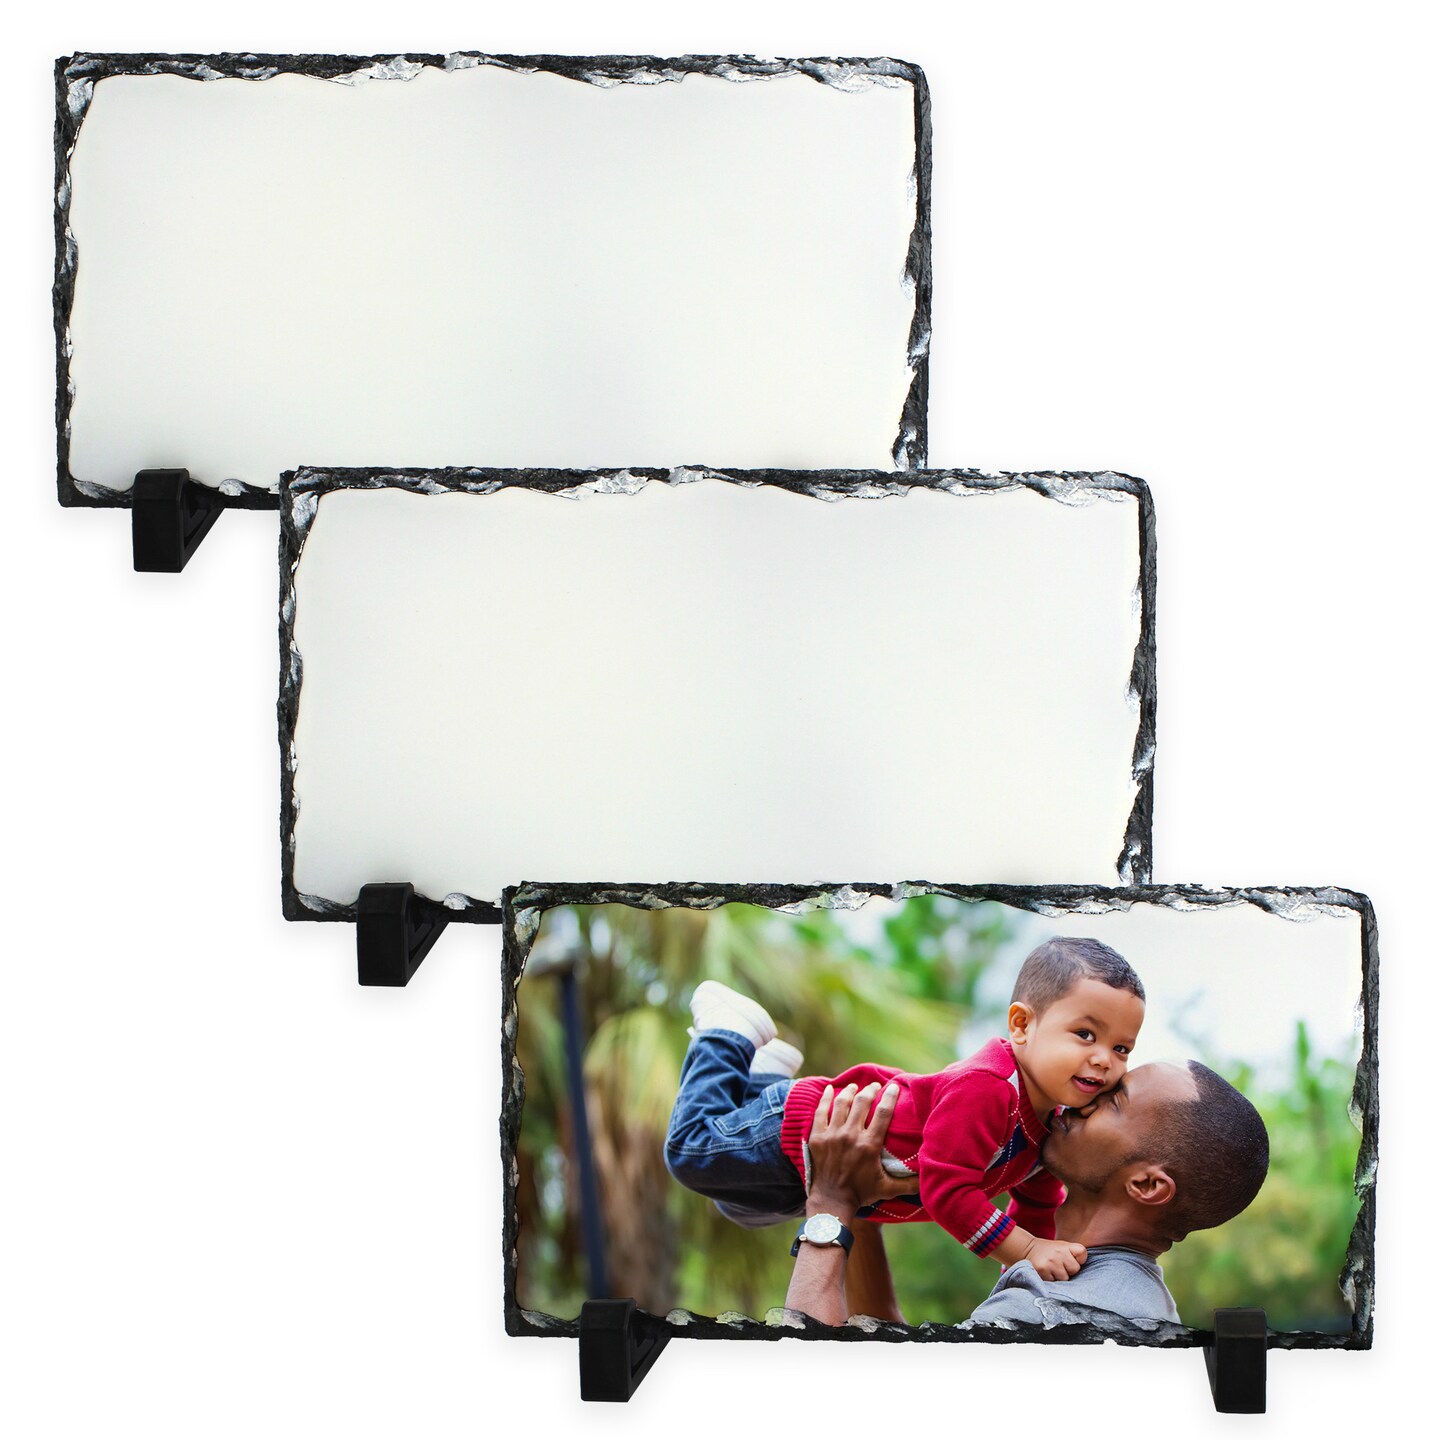 SubliSLATE Sublimation Slate Blank, Panoramic Long Rectangle. Includes  Black Display Feet for Photo Quality Sublimation Printing